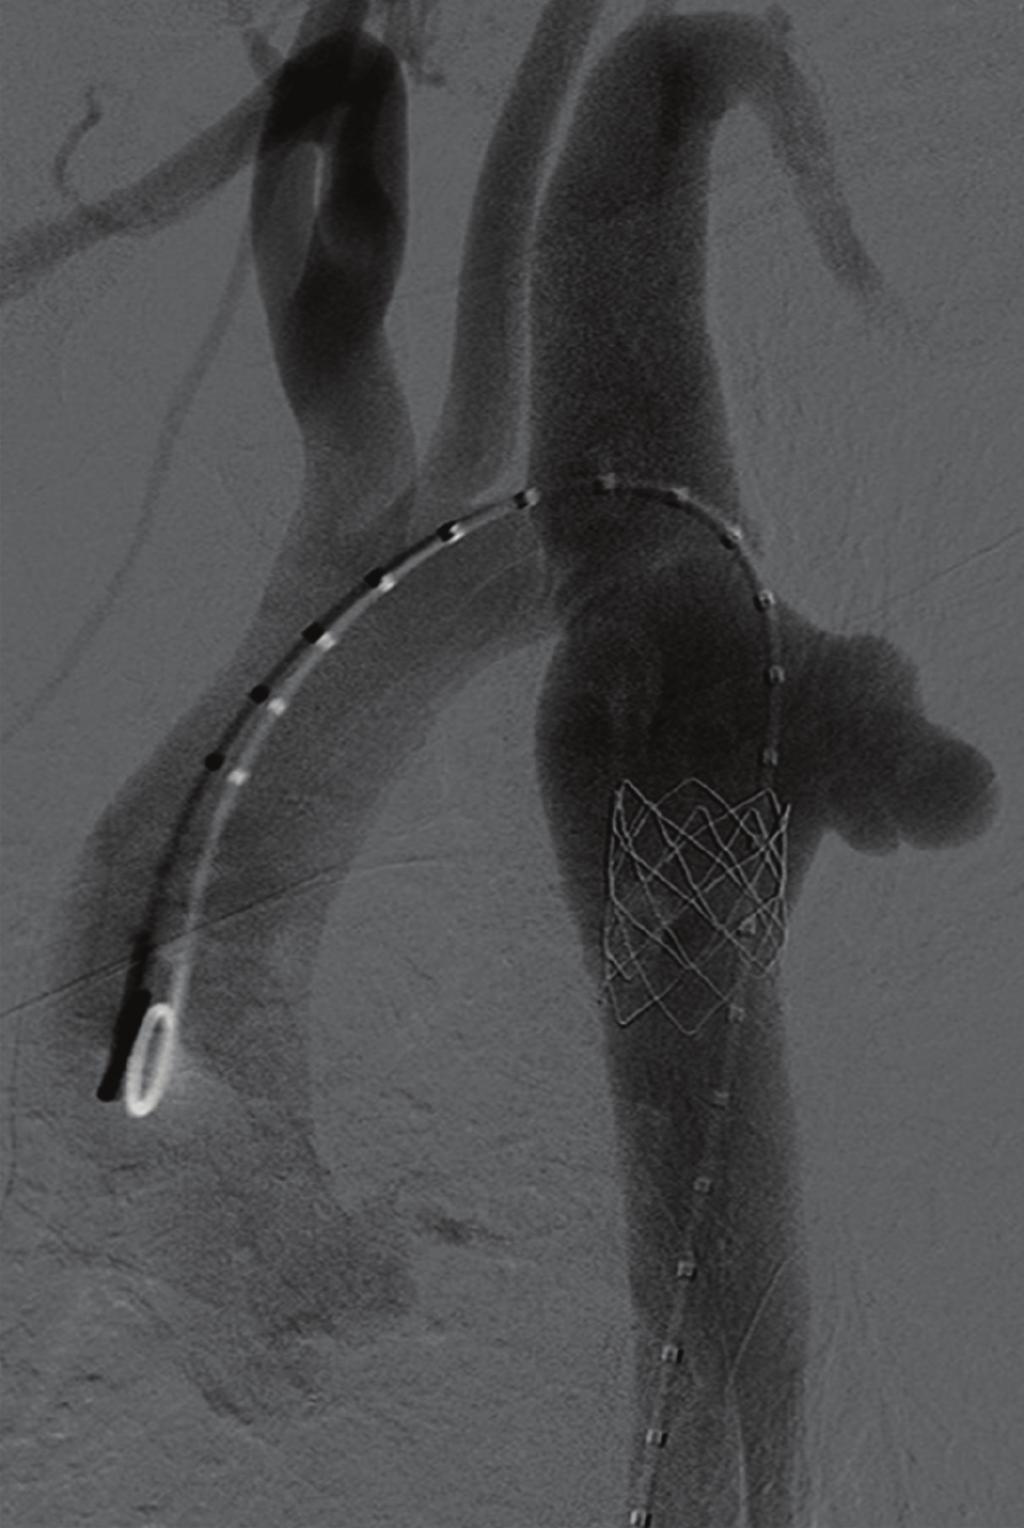 2 Figure 1: Aortic angiography showing an angulated aortic arch and a small caliber thoracic aorta.